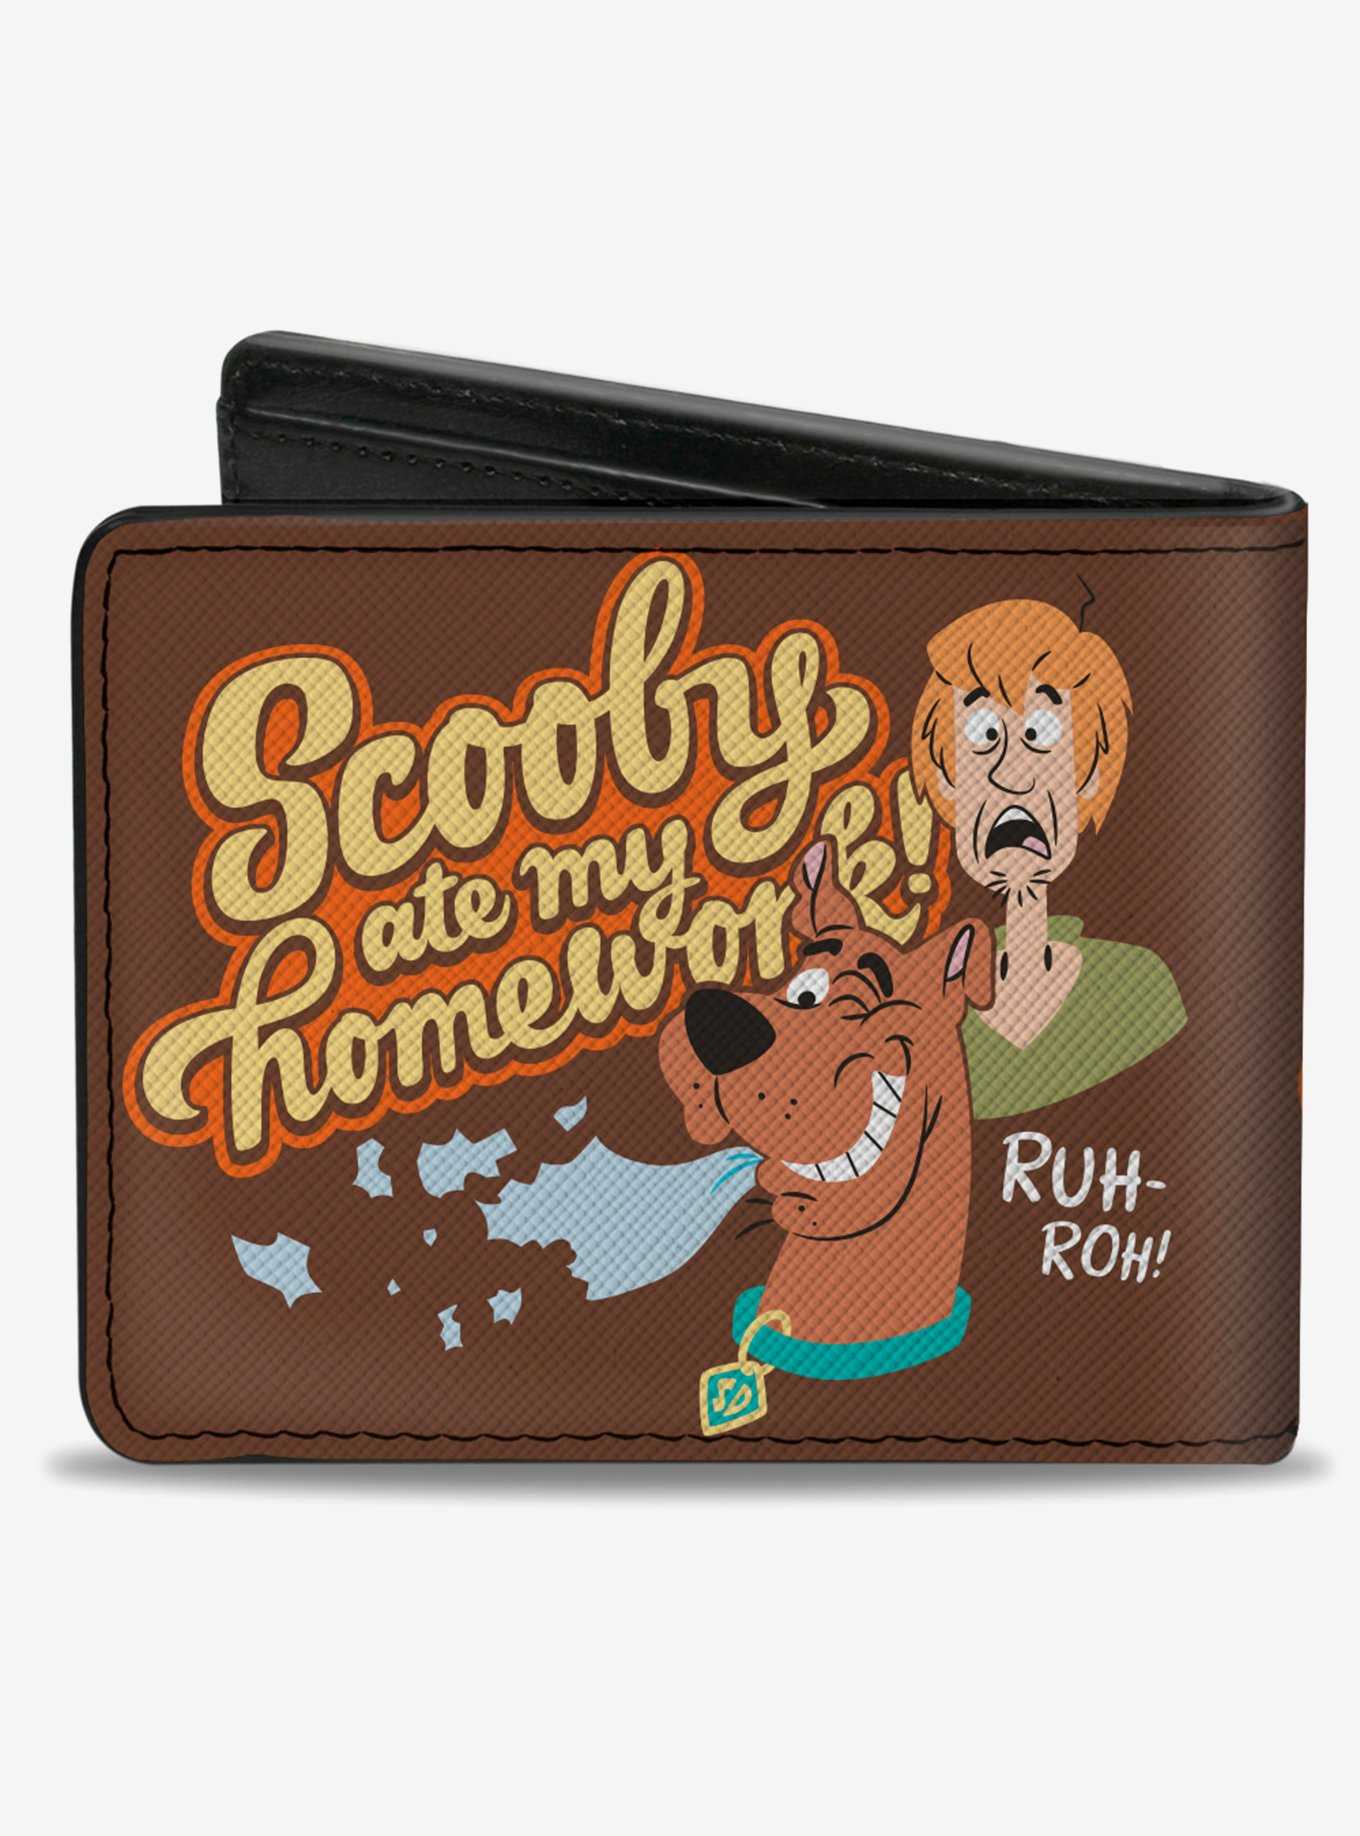 Scooby-Doo! Scooby Doo And Shaggy Scooby Ate My Homework Pose Brown Bifold Wallet, , hi-res